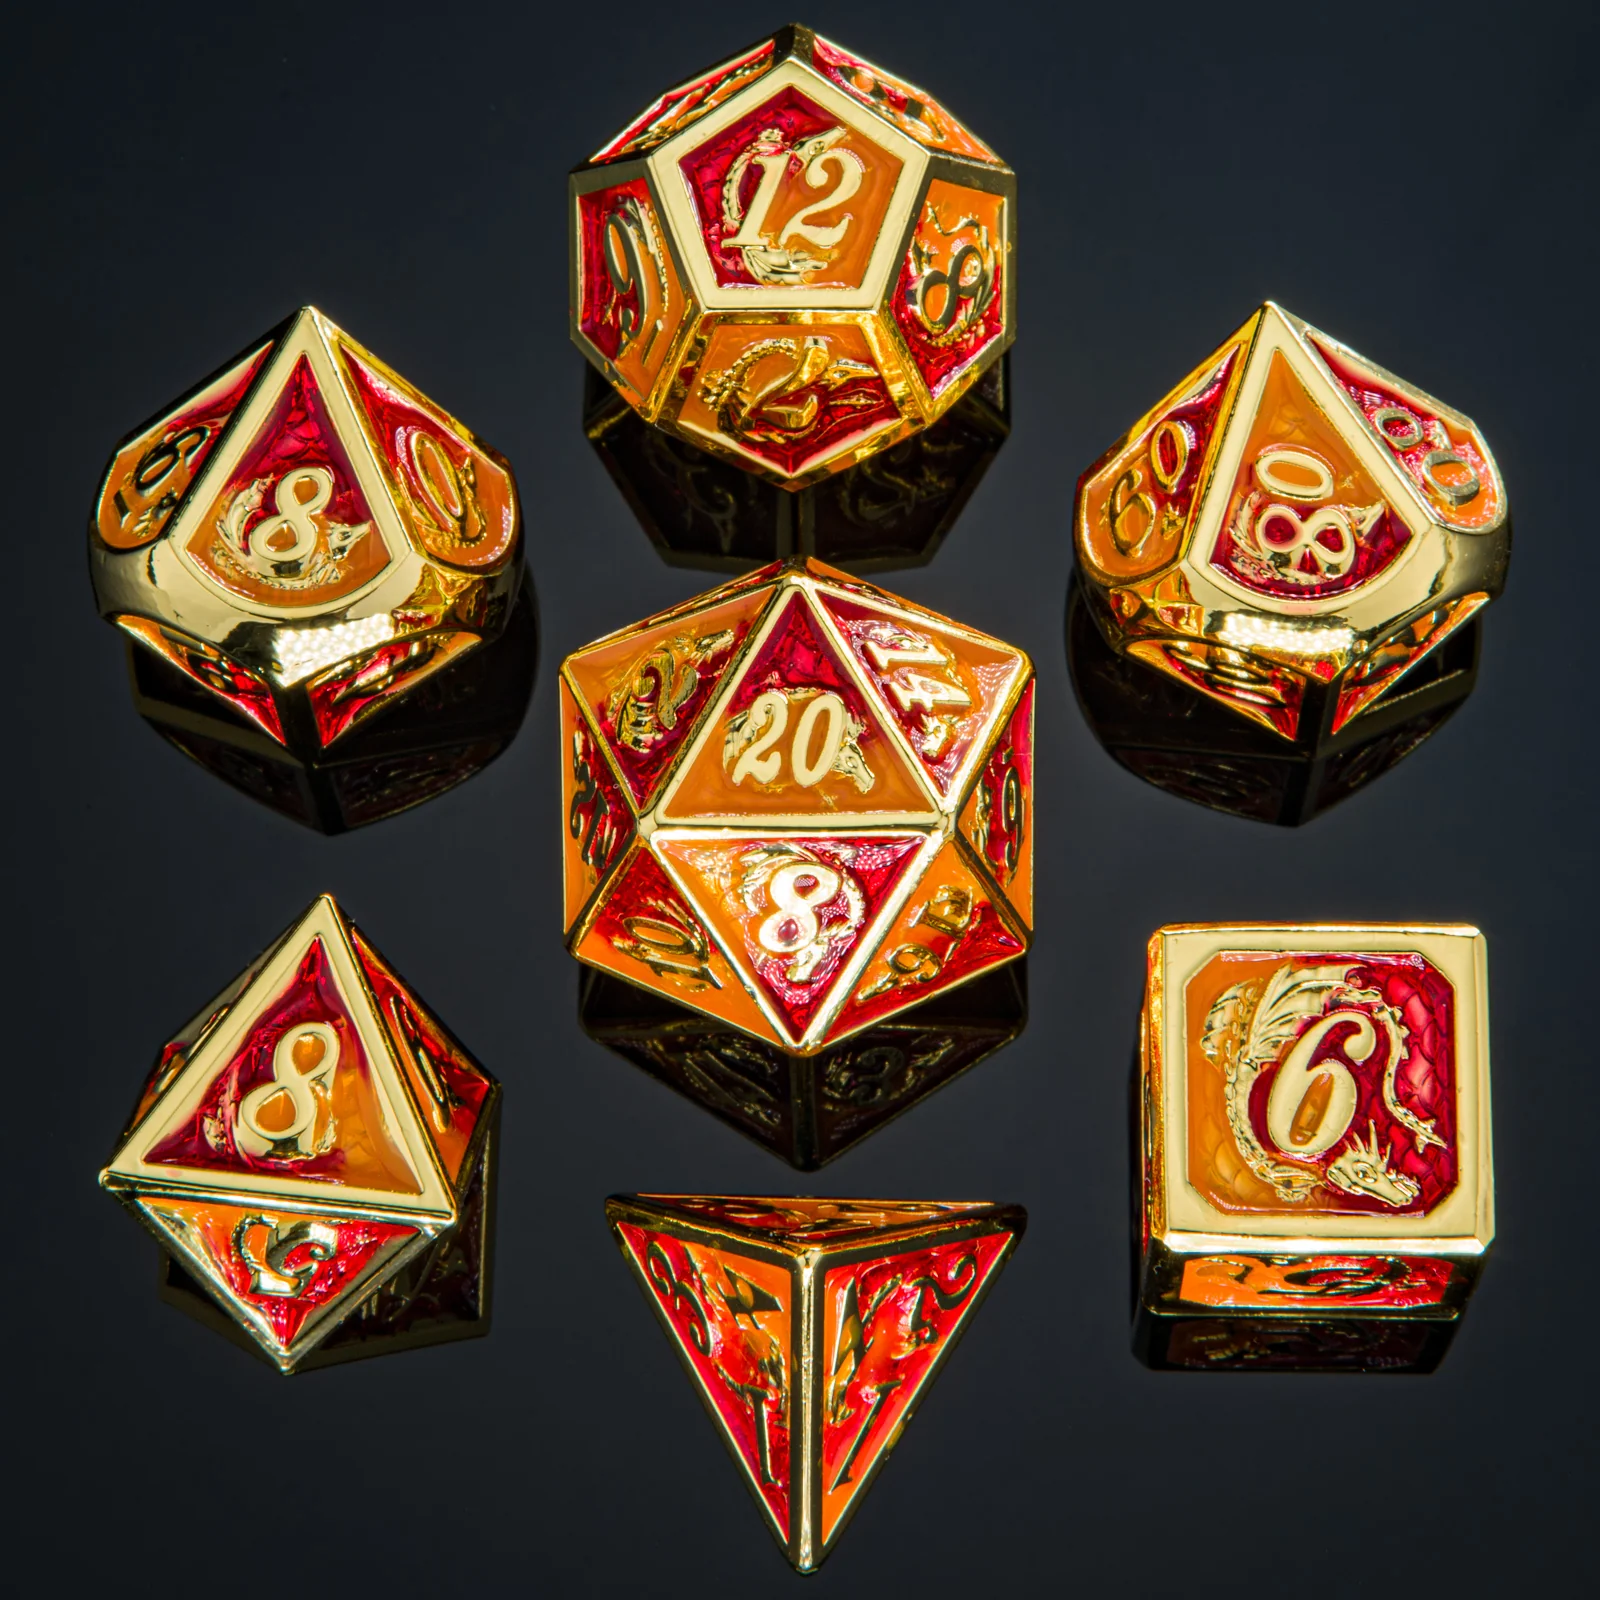 Solid Metal Dragon Polyhedral Dice Set - Gold with Red and Orange